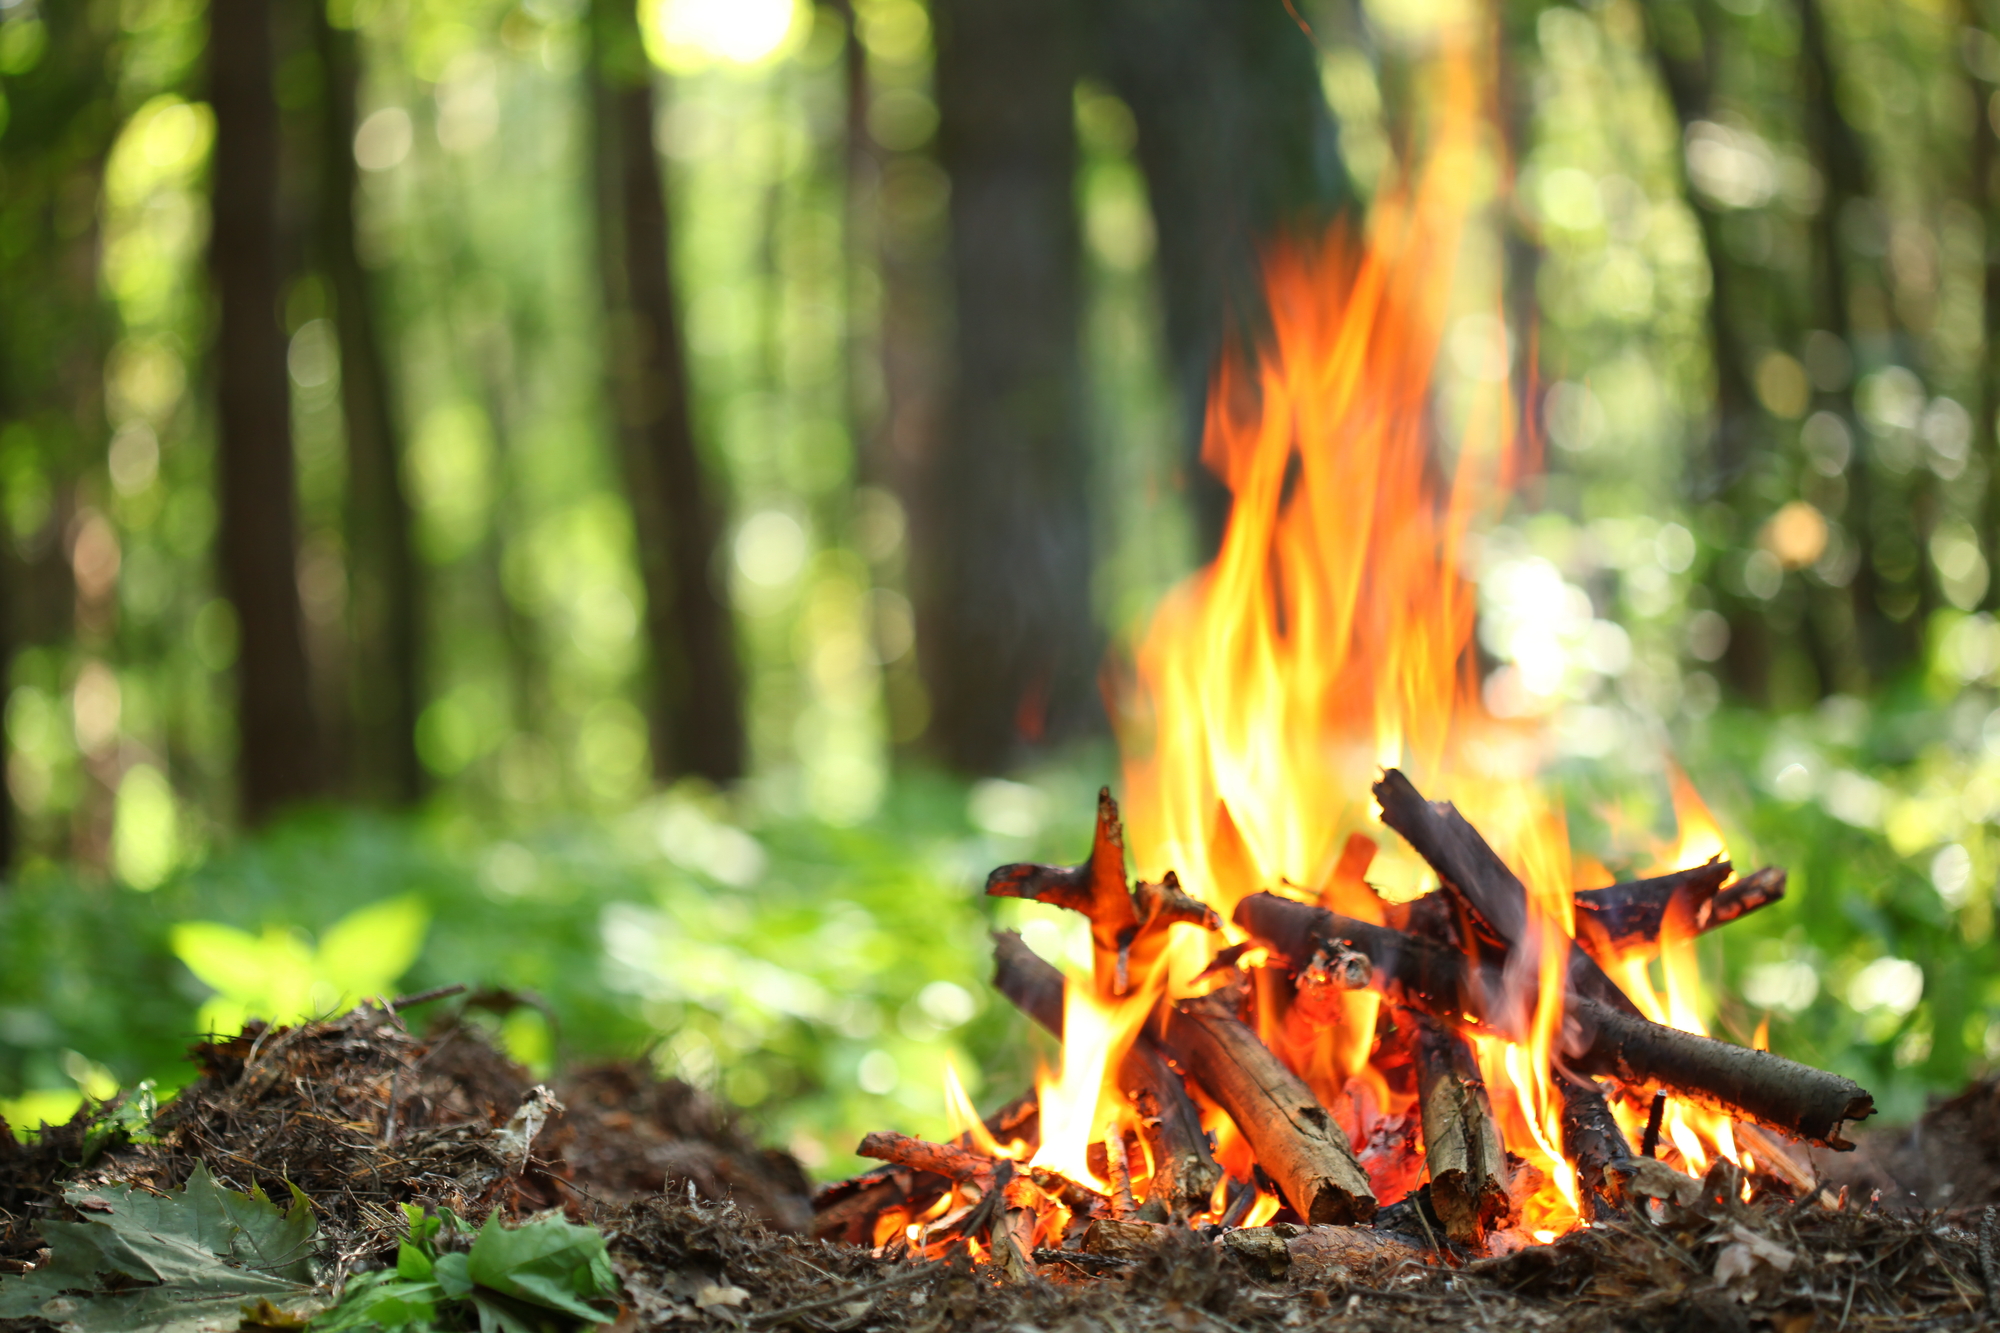 Burn Injuries - Bonfire in the forest.